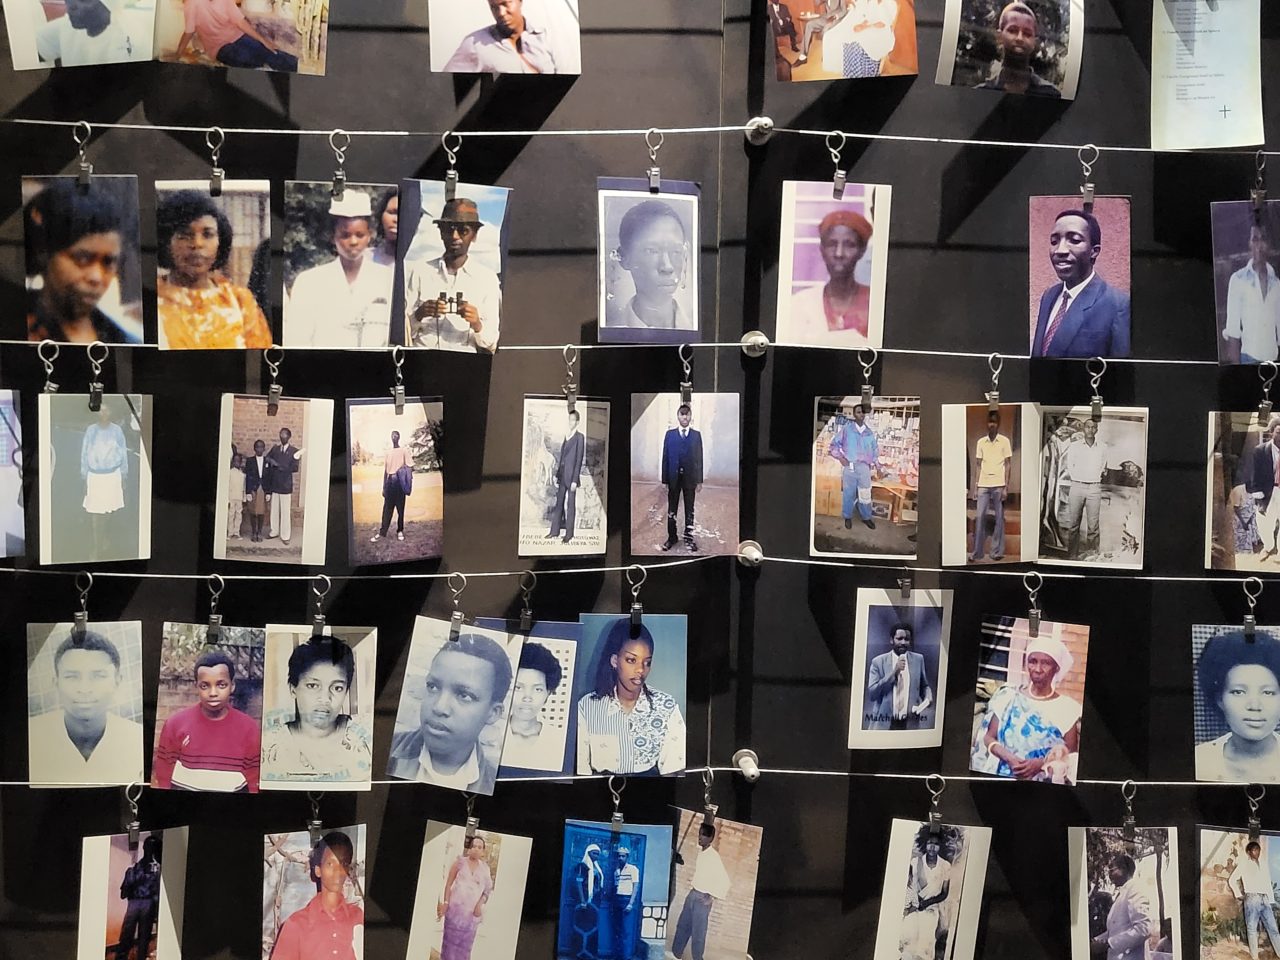 HMDT blog: Rwanda before, during and after the genocide